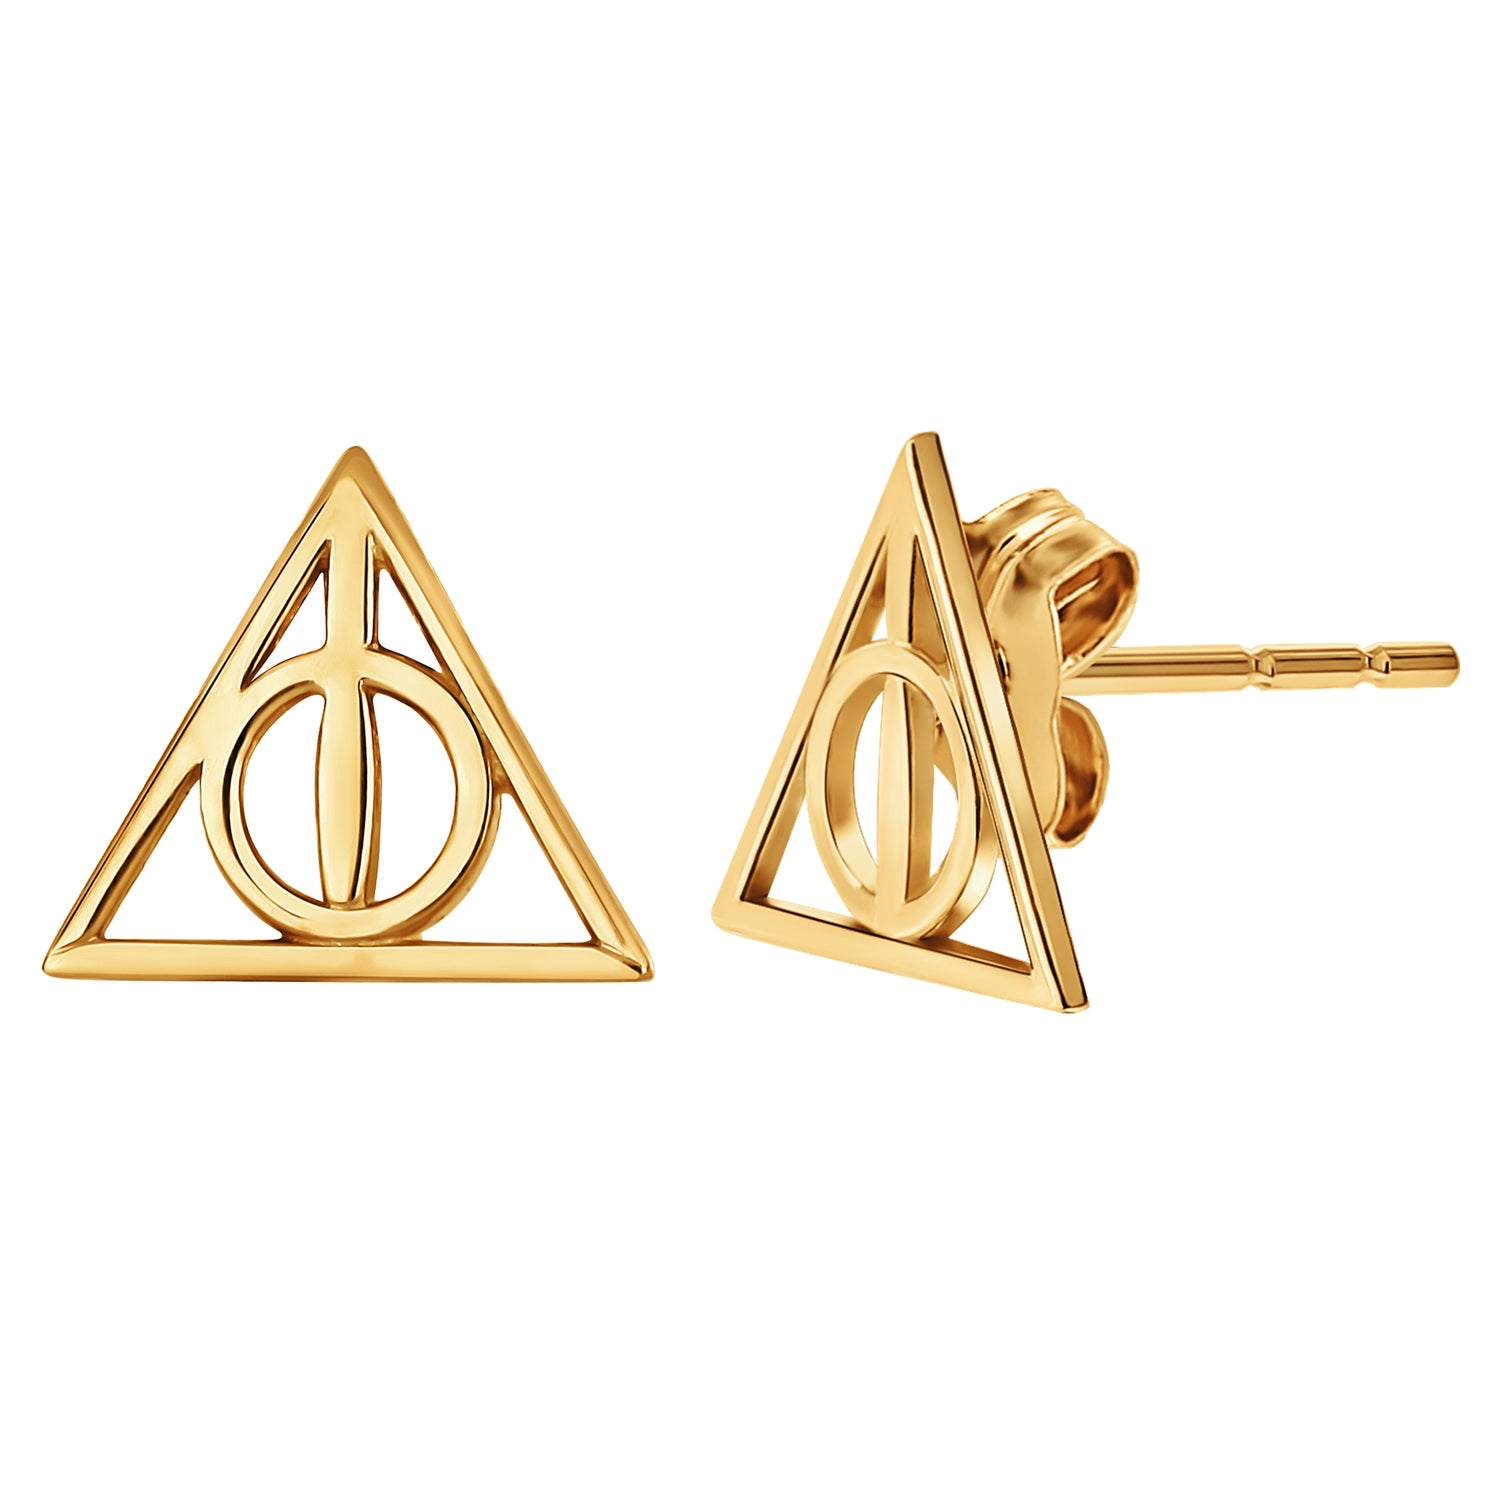 Harry Potter - Glasses, Snitch & Deathly Hallows Stud Earrings 3-Pack -  Clothing - ZiNG Pop Culture